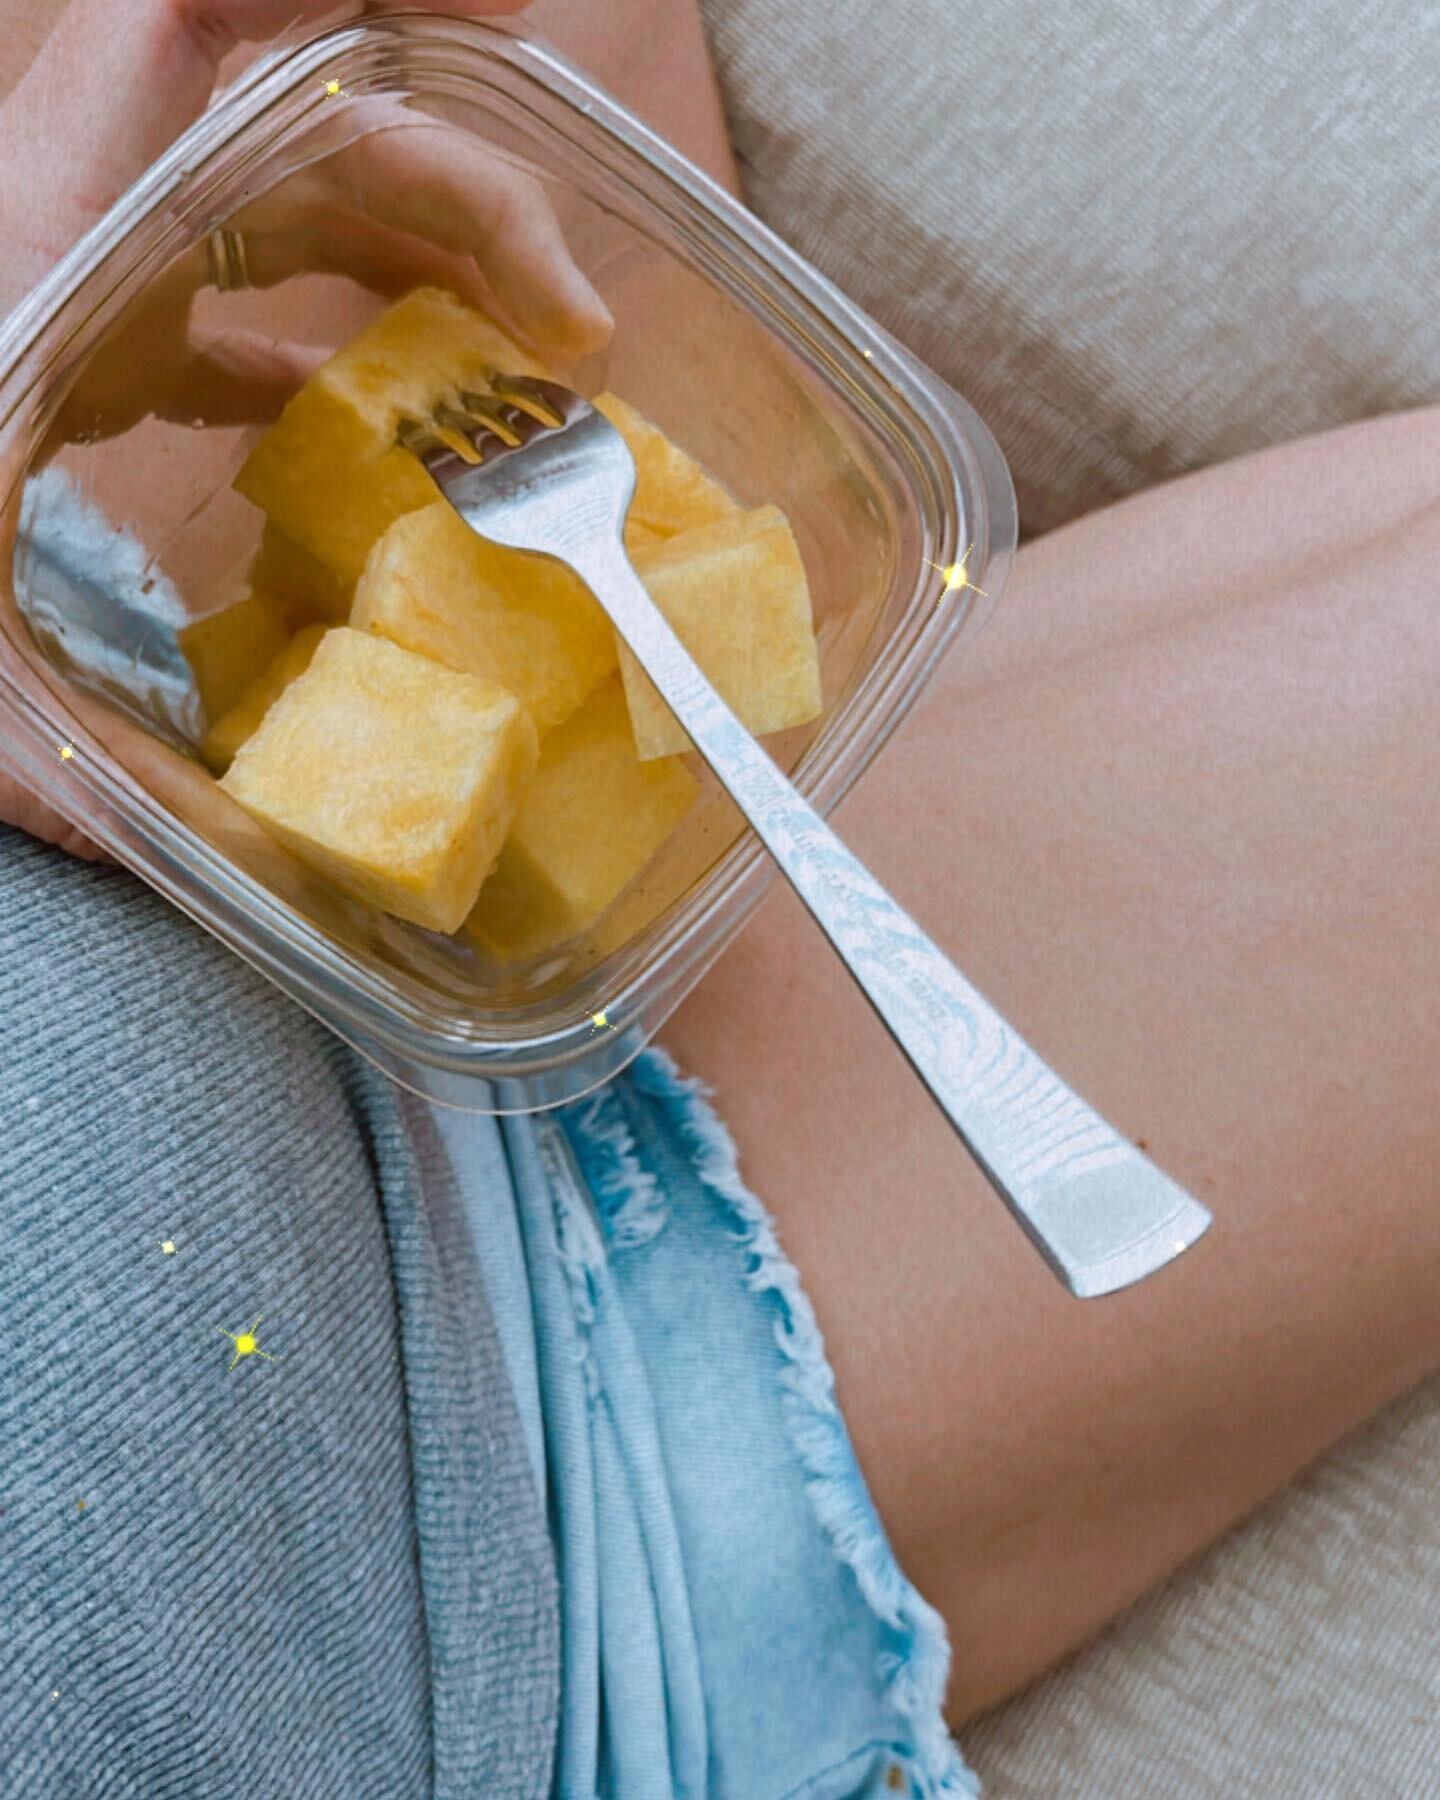 did you know pineapple can help fight nausea during pregnancy??

pineapples are naturally high in vitamin B6, which has been proven to help fight pregnancy related  nausea.

they are also high in vitamin C, fiber and digestive enzymes!

making them a